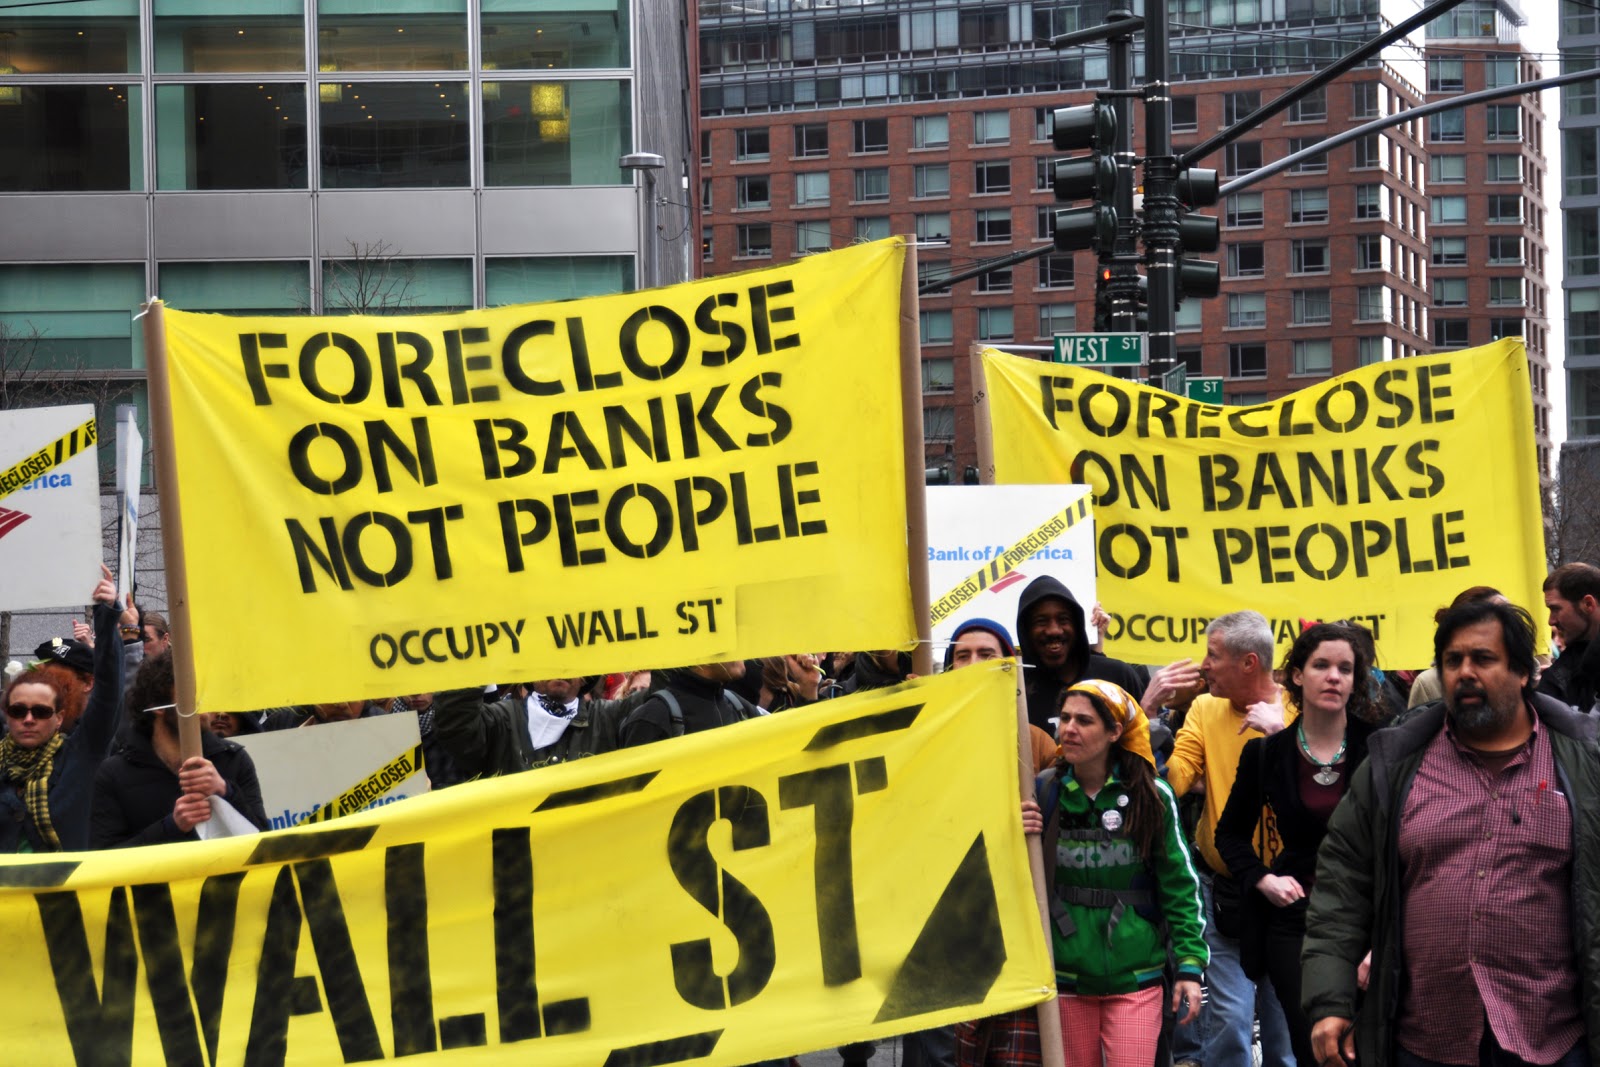 Foreclose on Banks